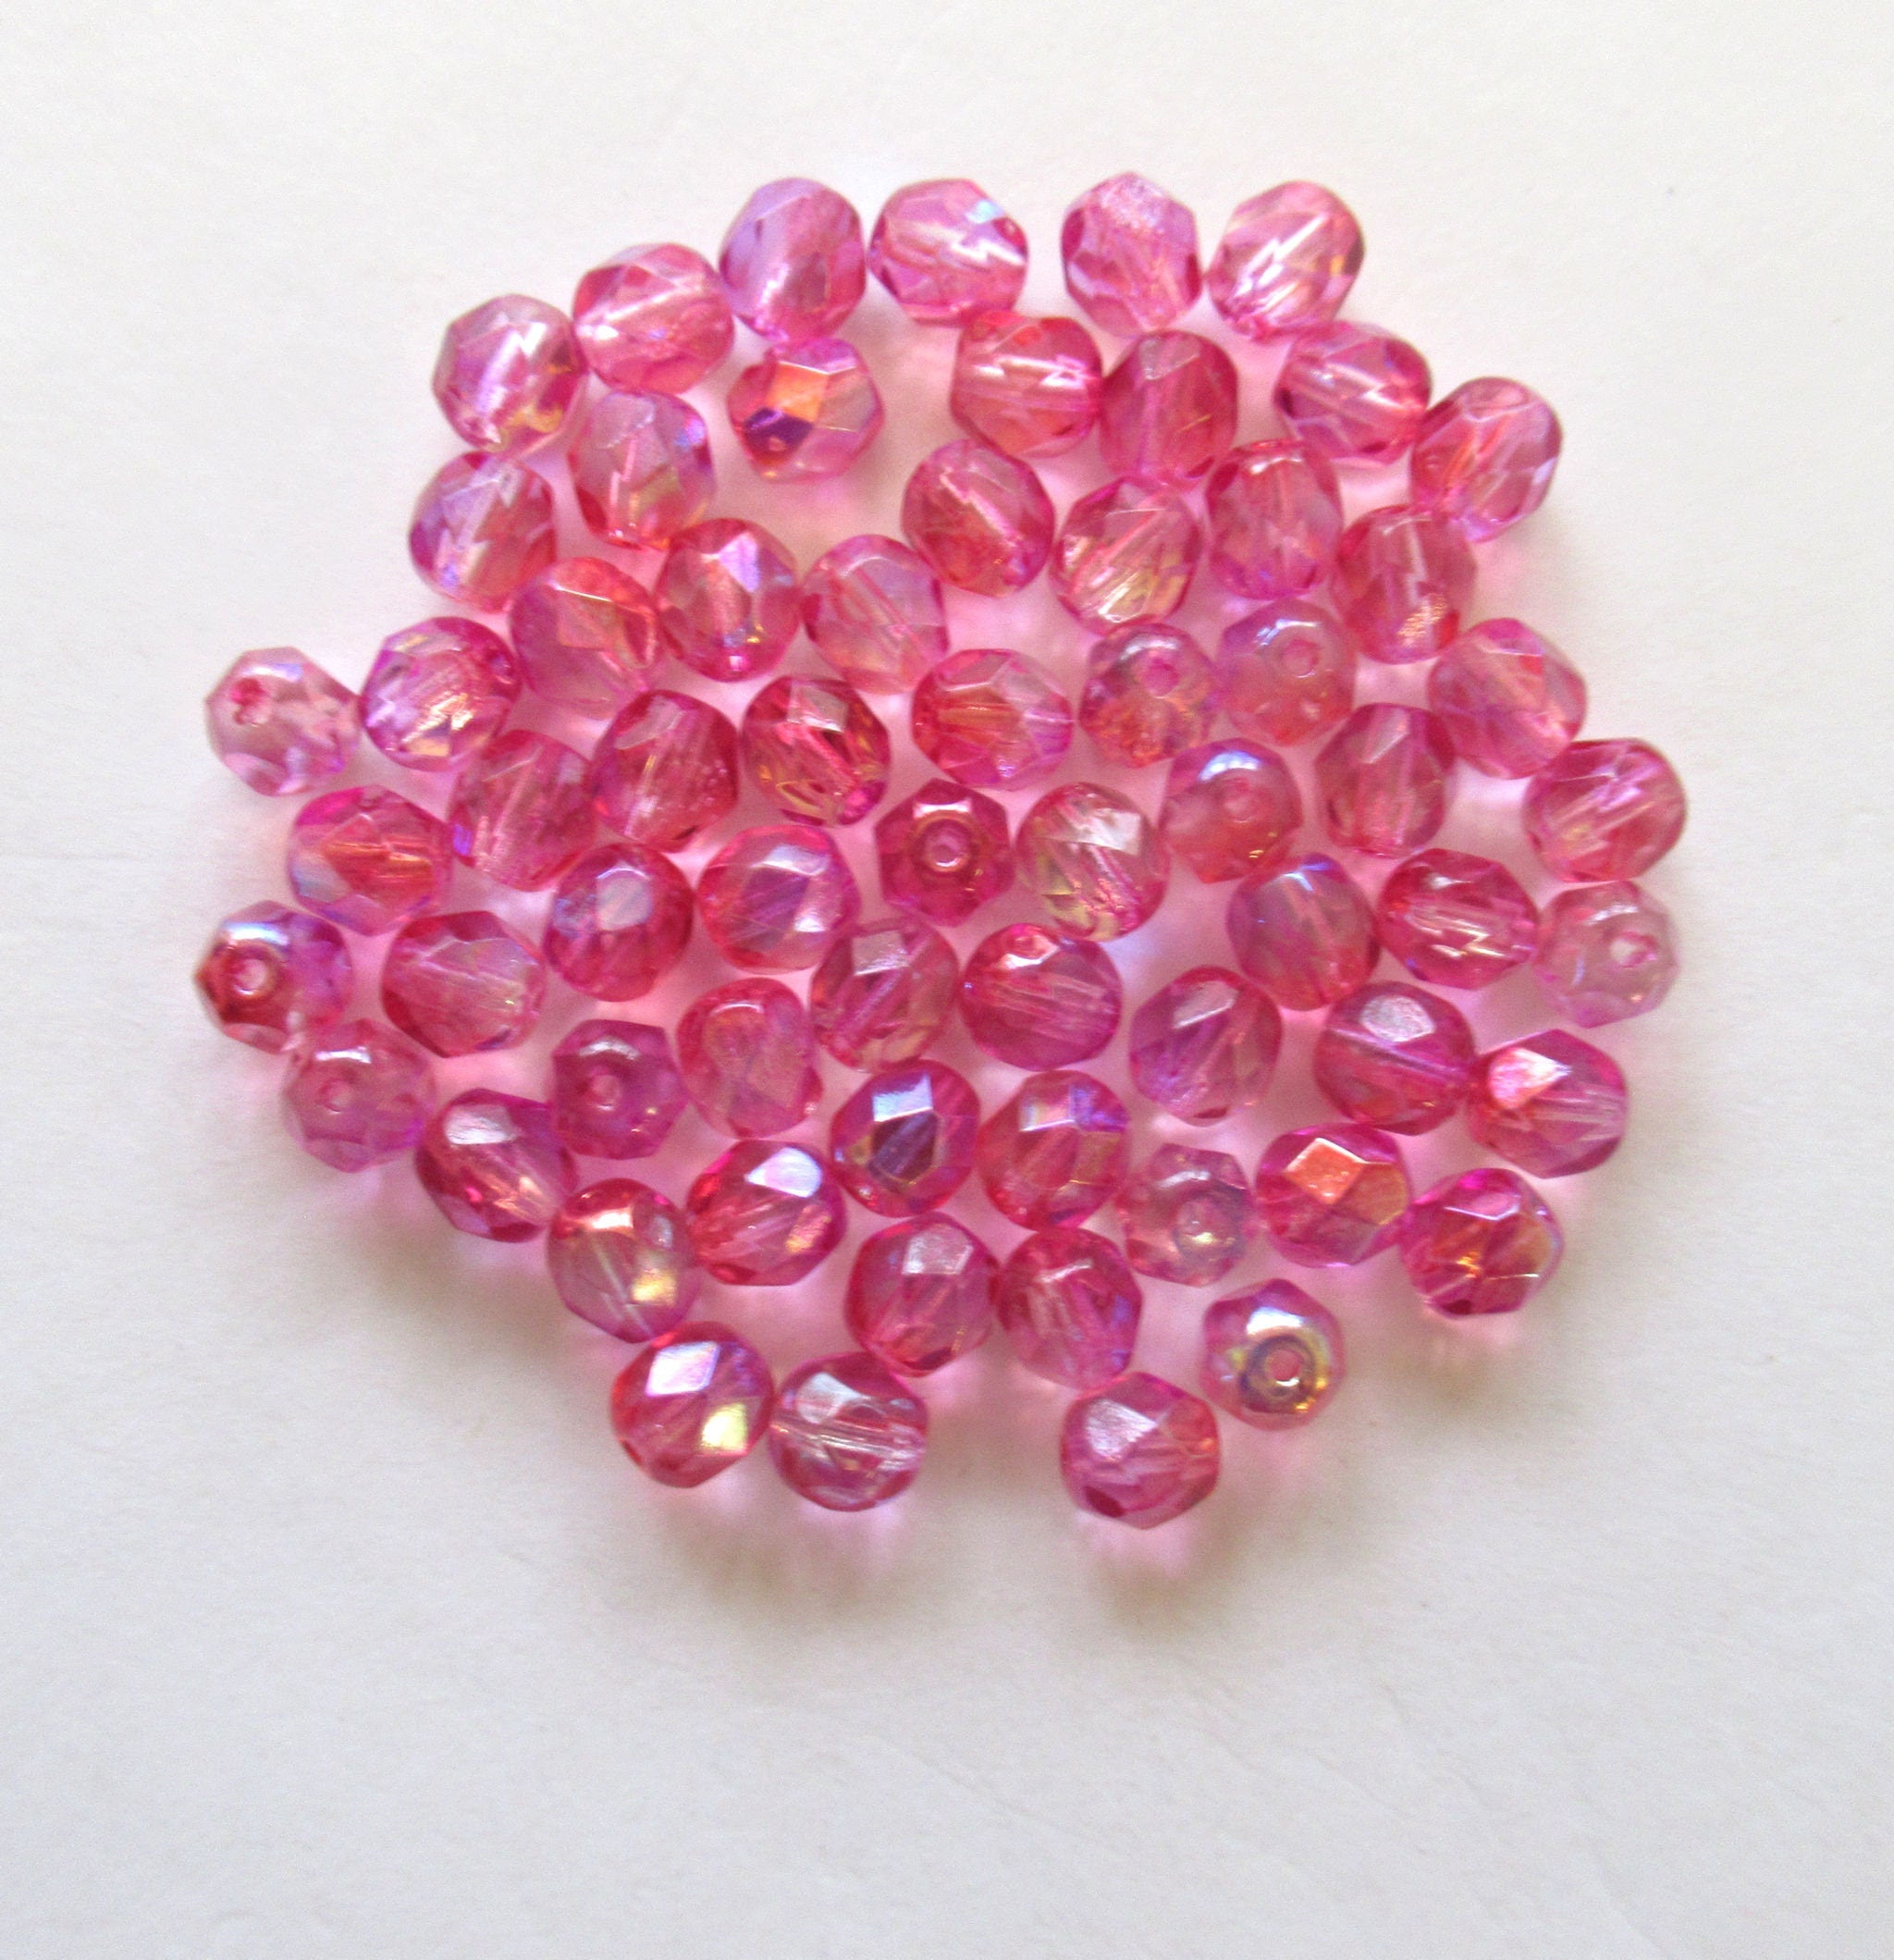 25 8mm Ruby Red, Garnet Czech glass beads, firepolished, faceted round  beads, C6525 – Glorious Glass Beads